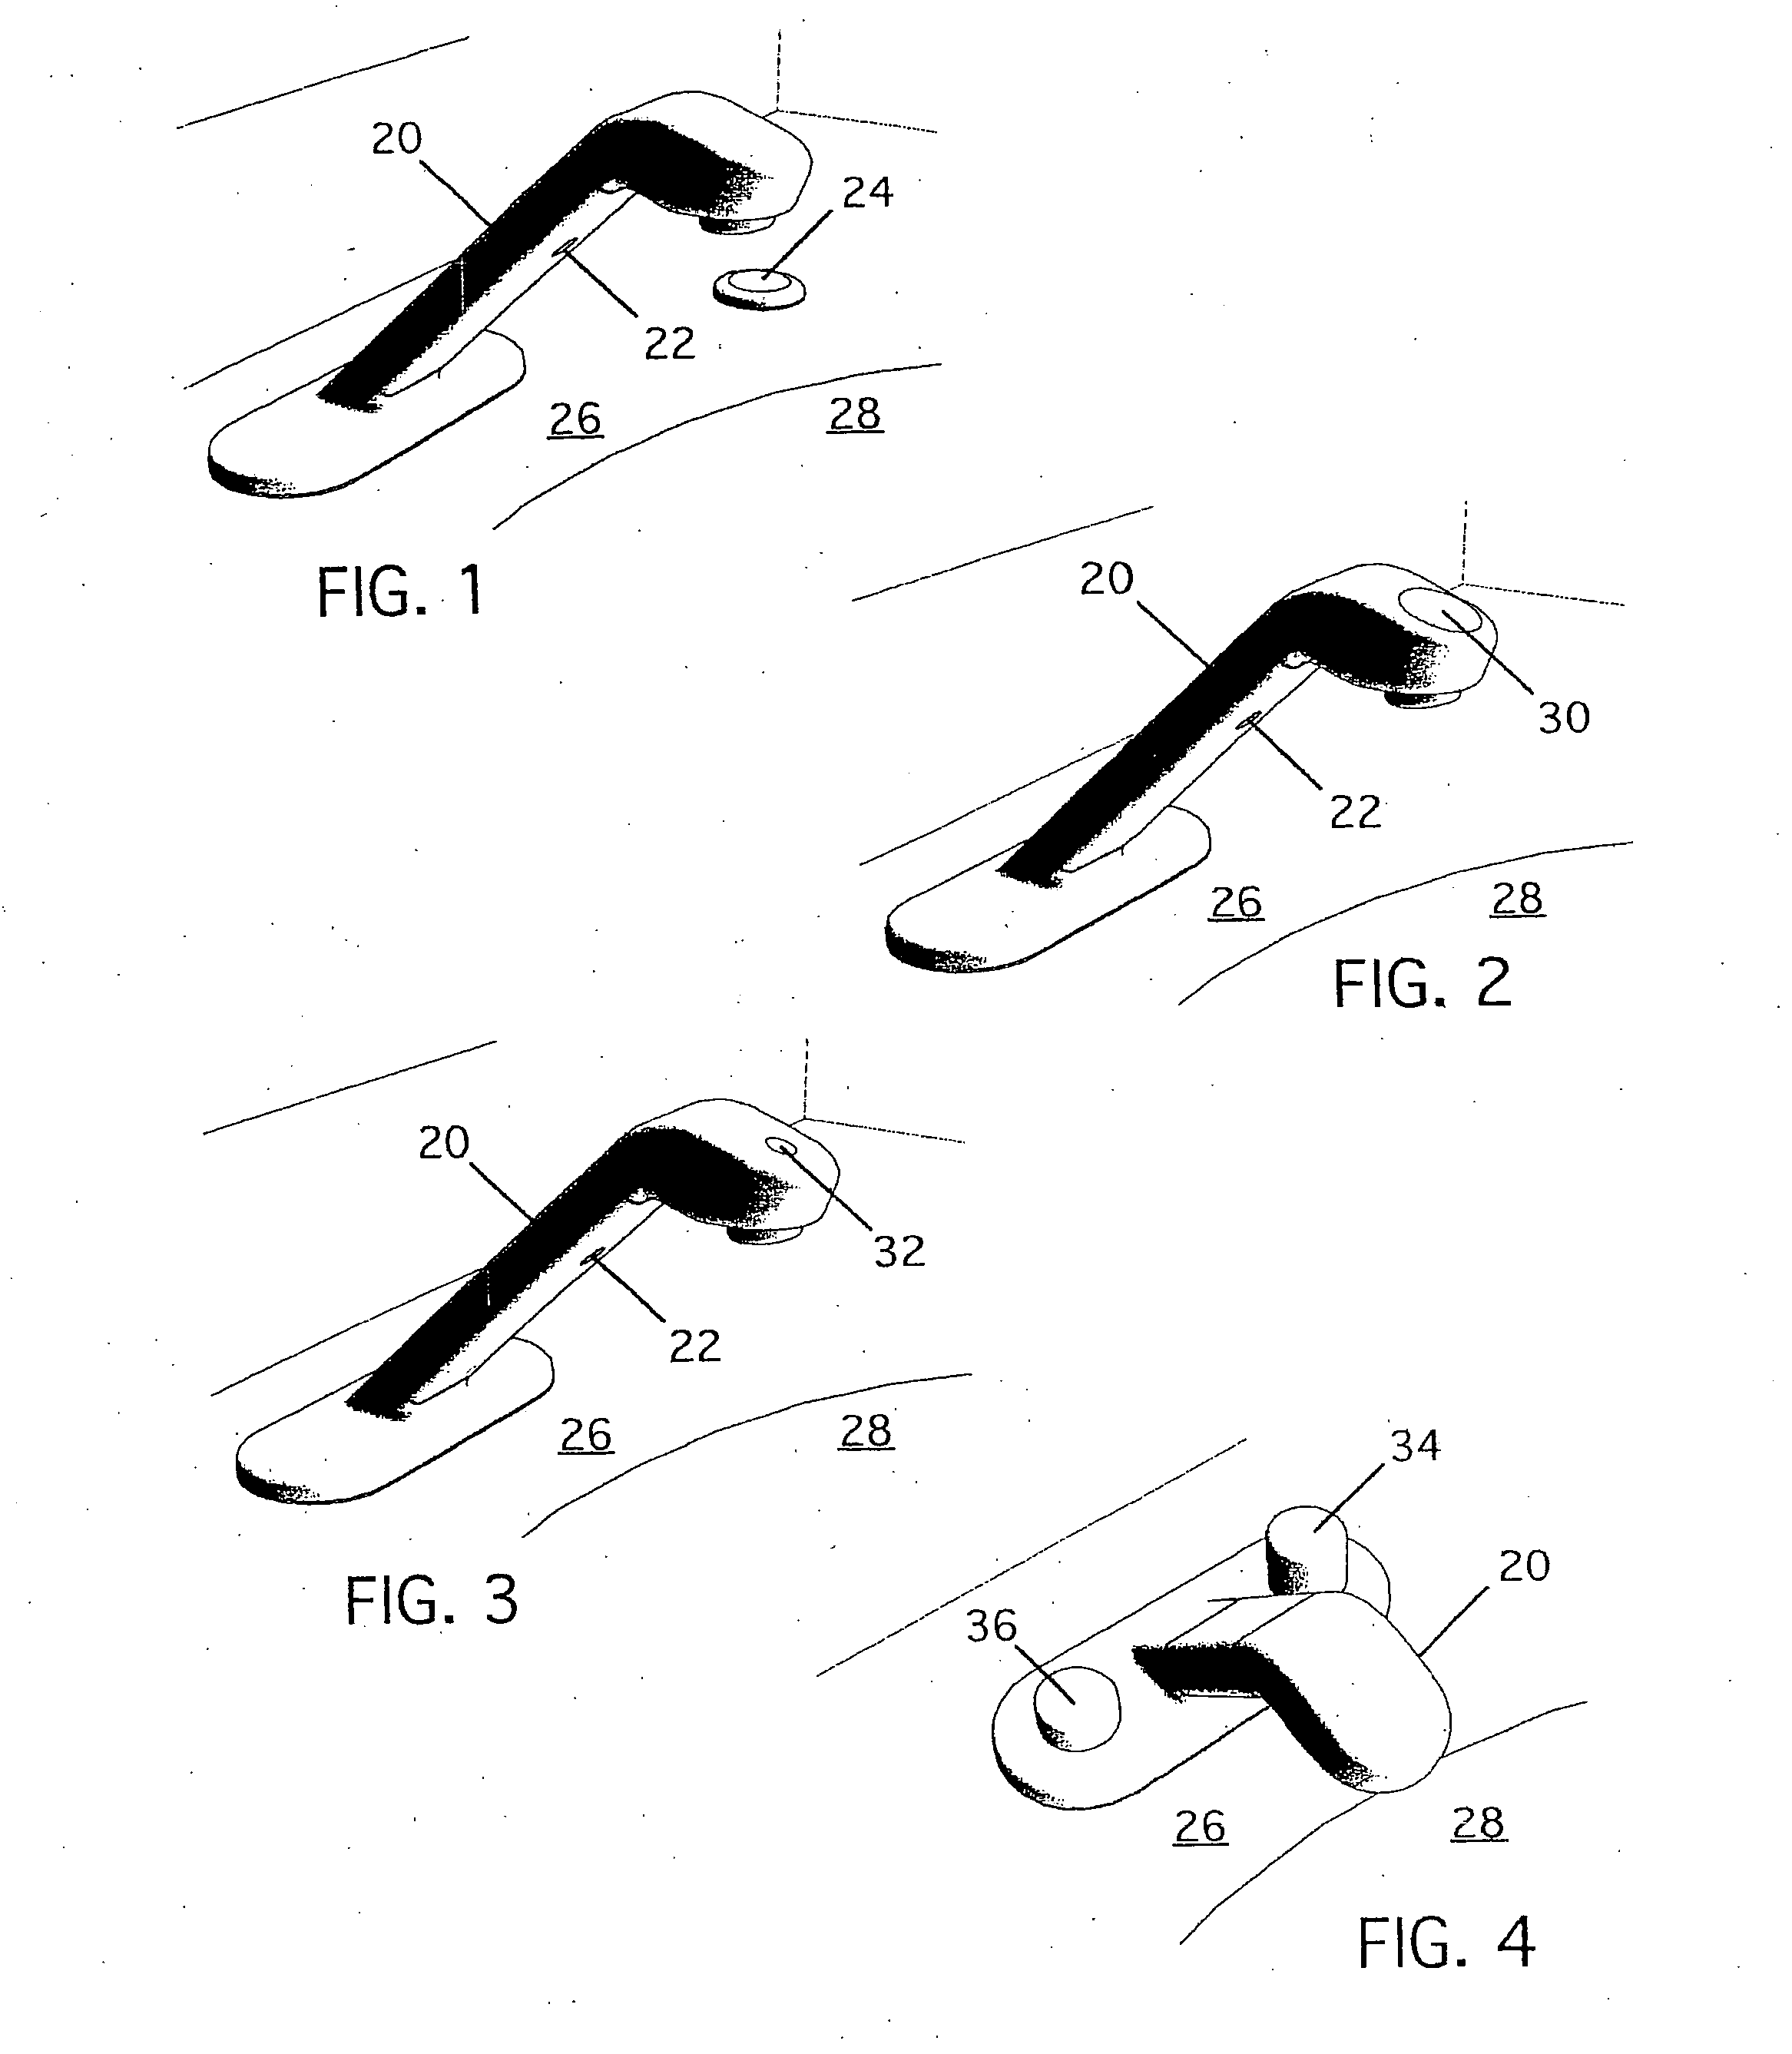 Dispensing system and method, and injector therefor